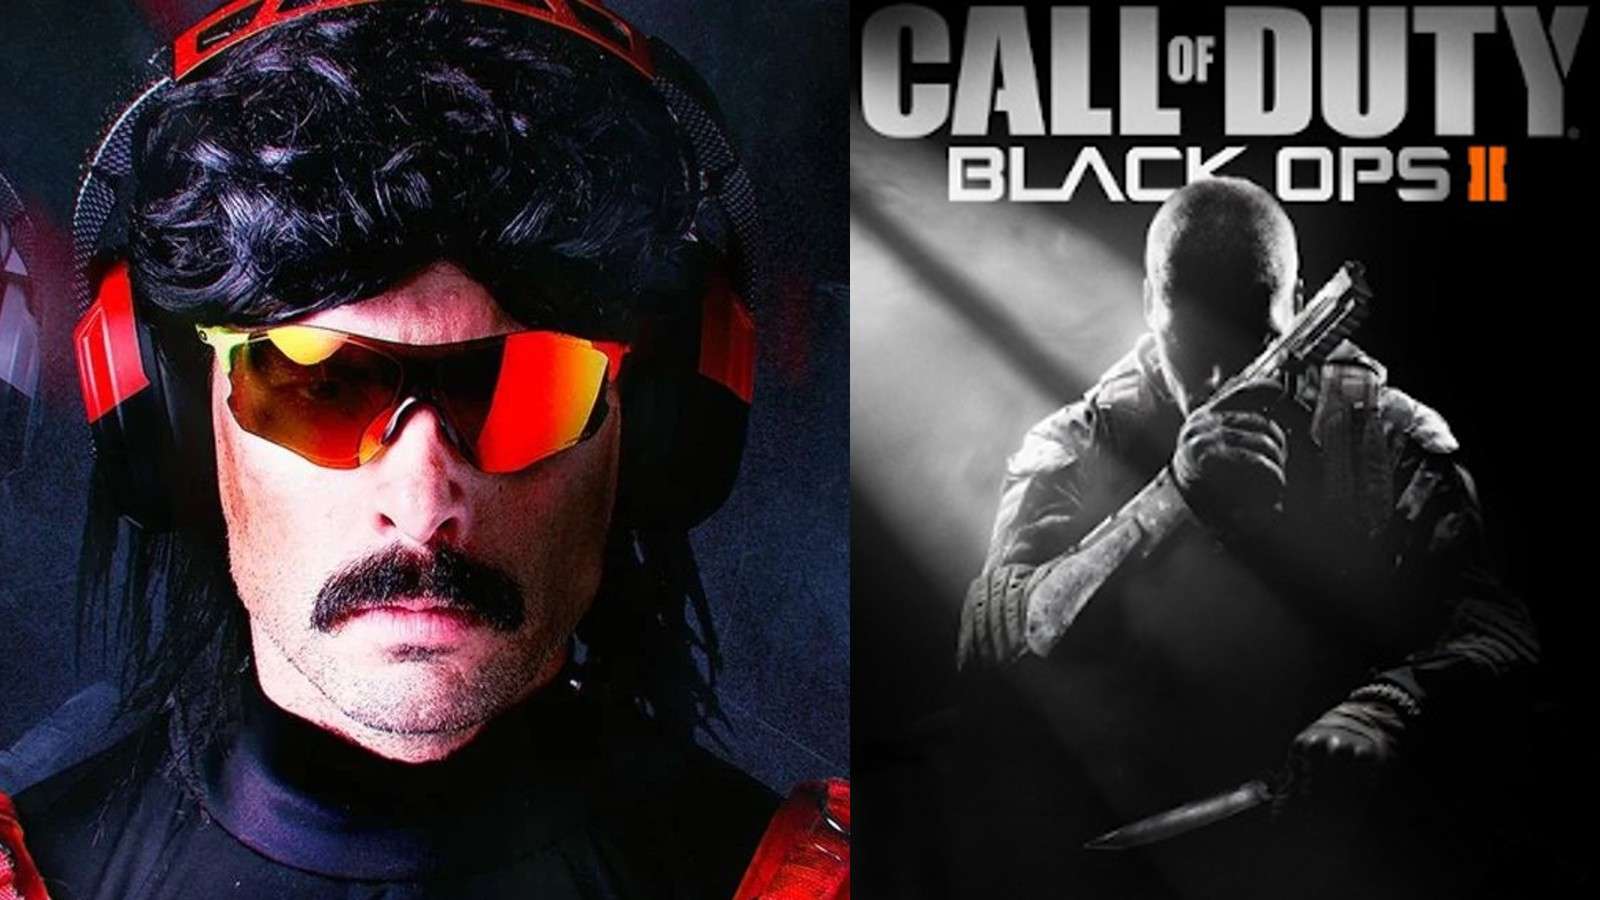 Call of Duty®: Black Ops 2